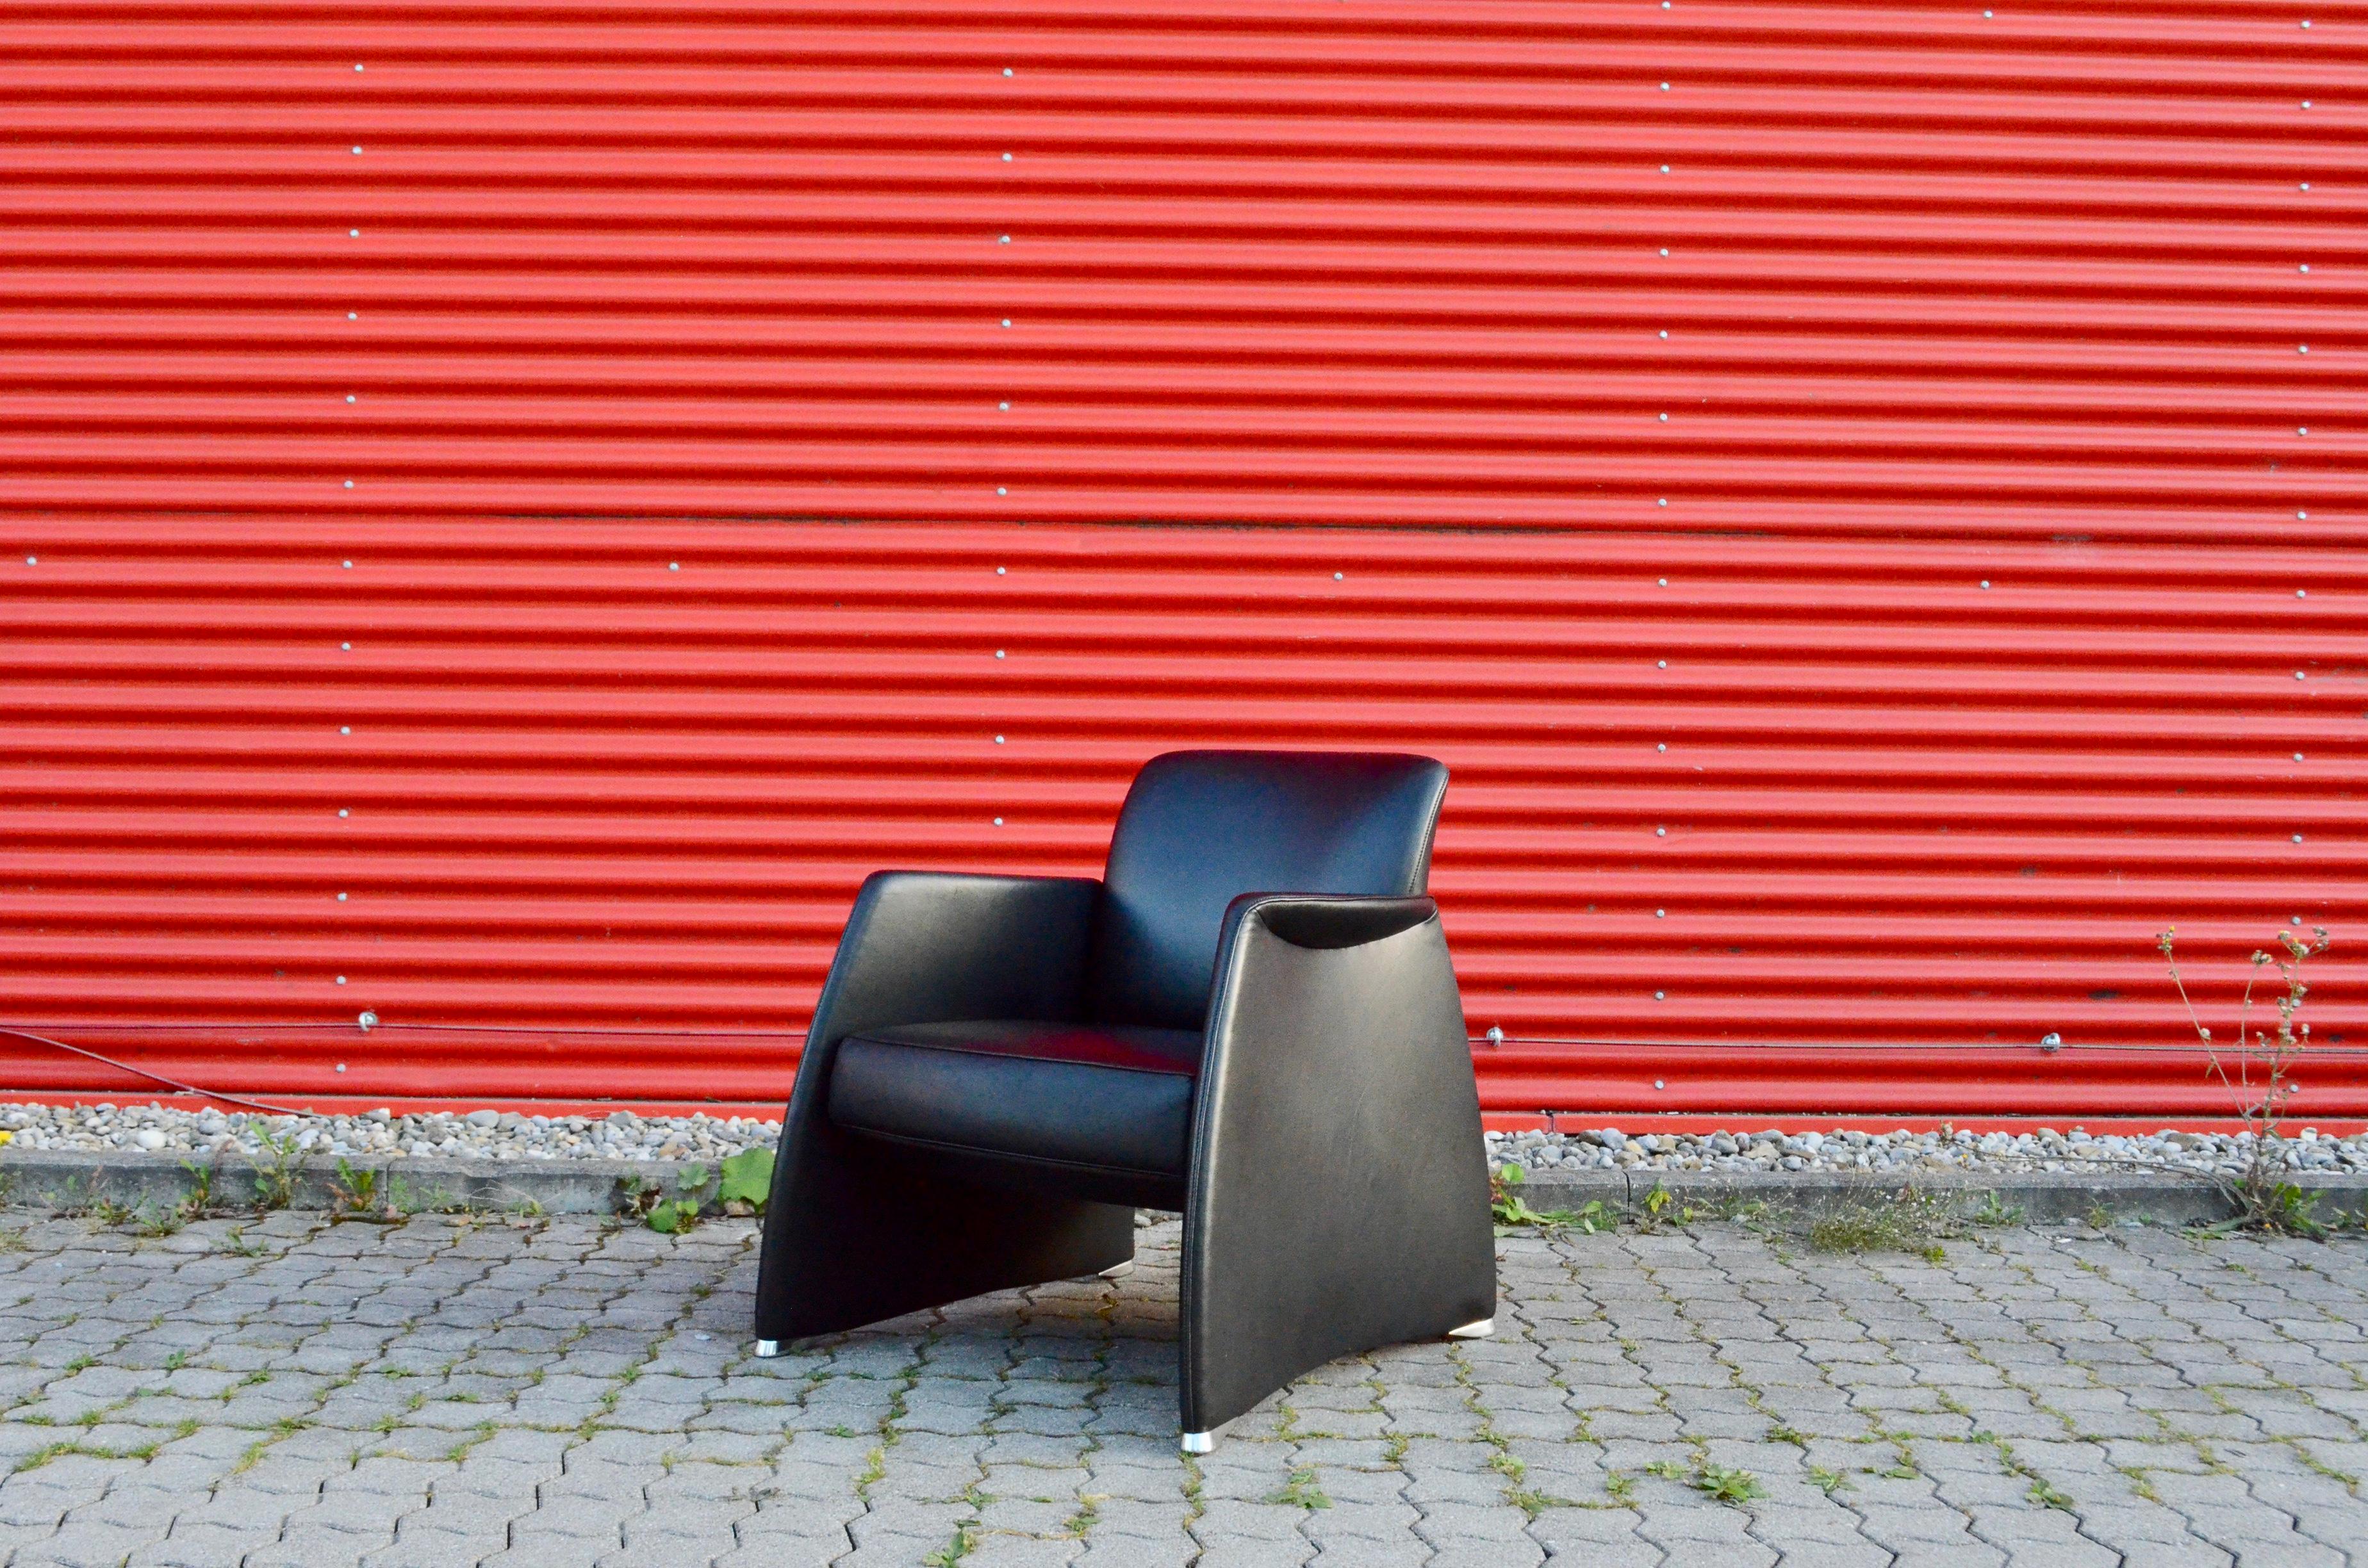 De Sede from Switzerland manufactured this elegant armchair.
Black select leather and a sculptural shape.
Feet made of polished aluminium
We have 2 chairs in stock.